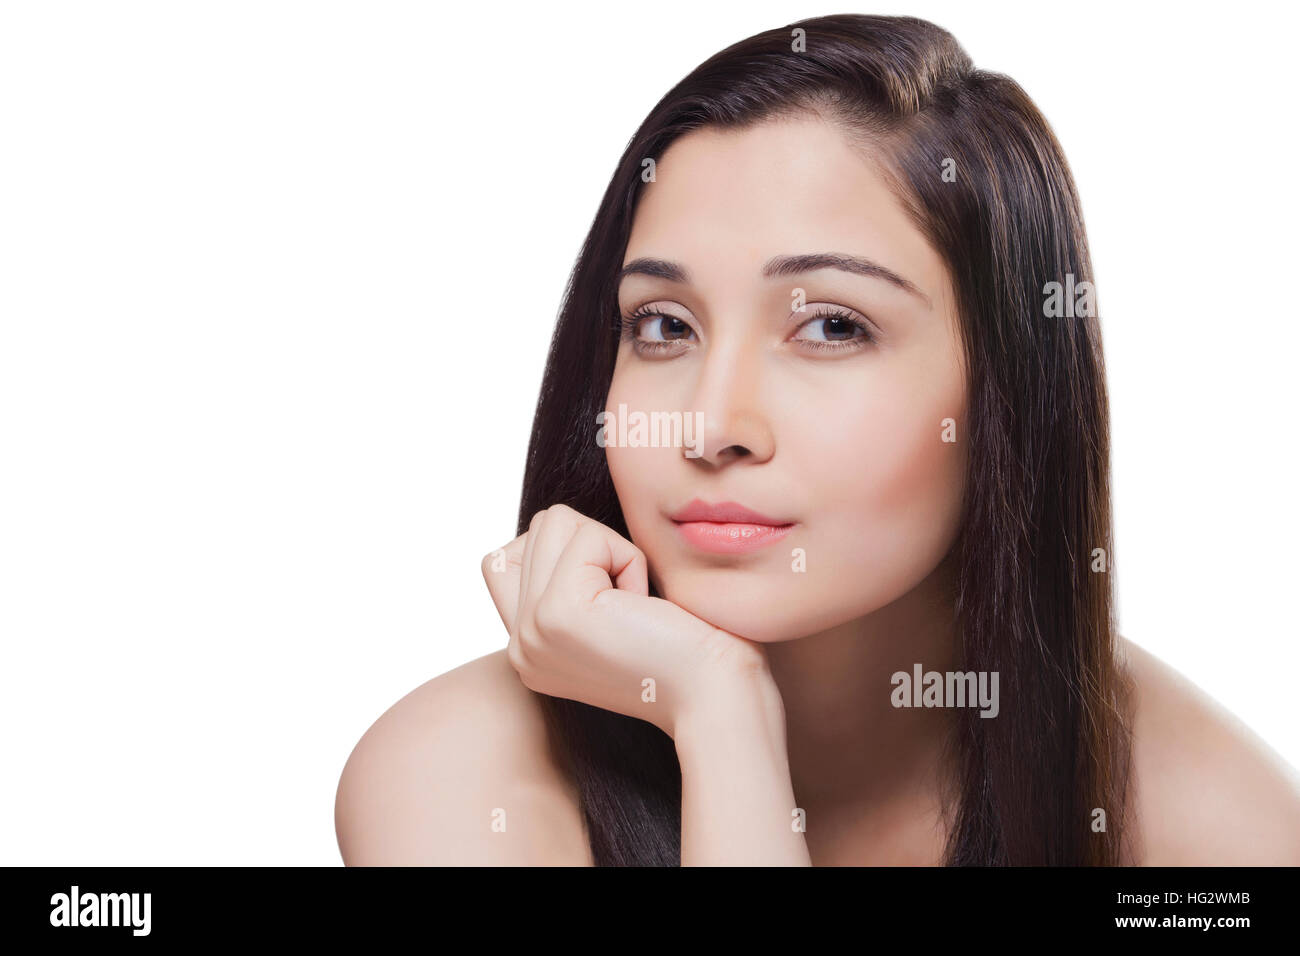 Portrait of beautiful young woman Stock Photo